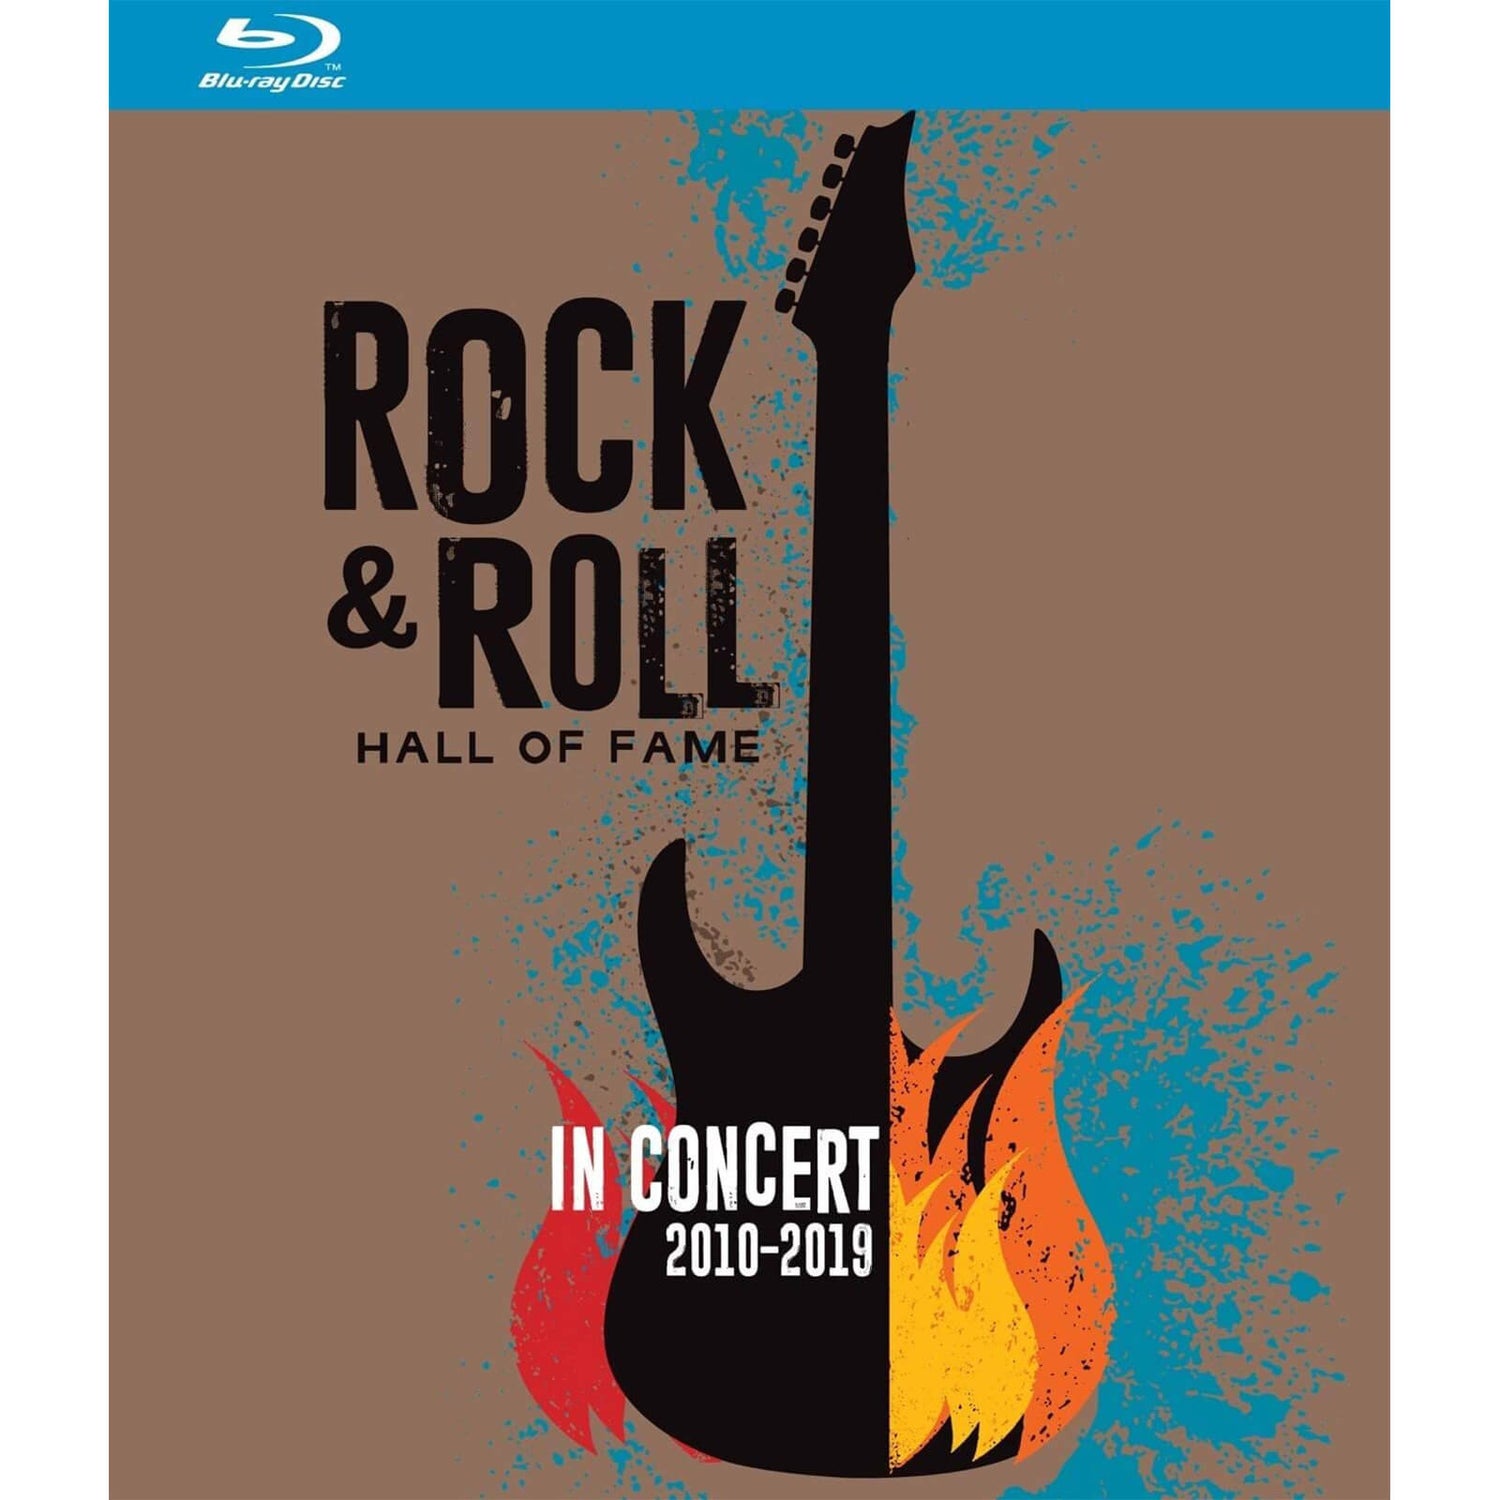 Rock & Roll Hall of Fame in Concert 2010 - 2019